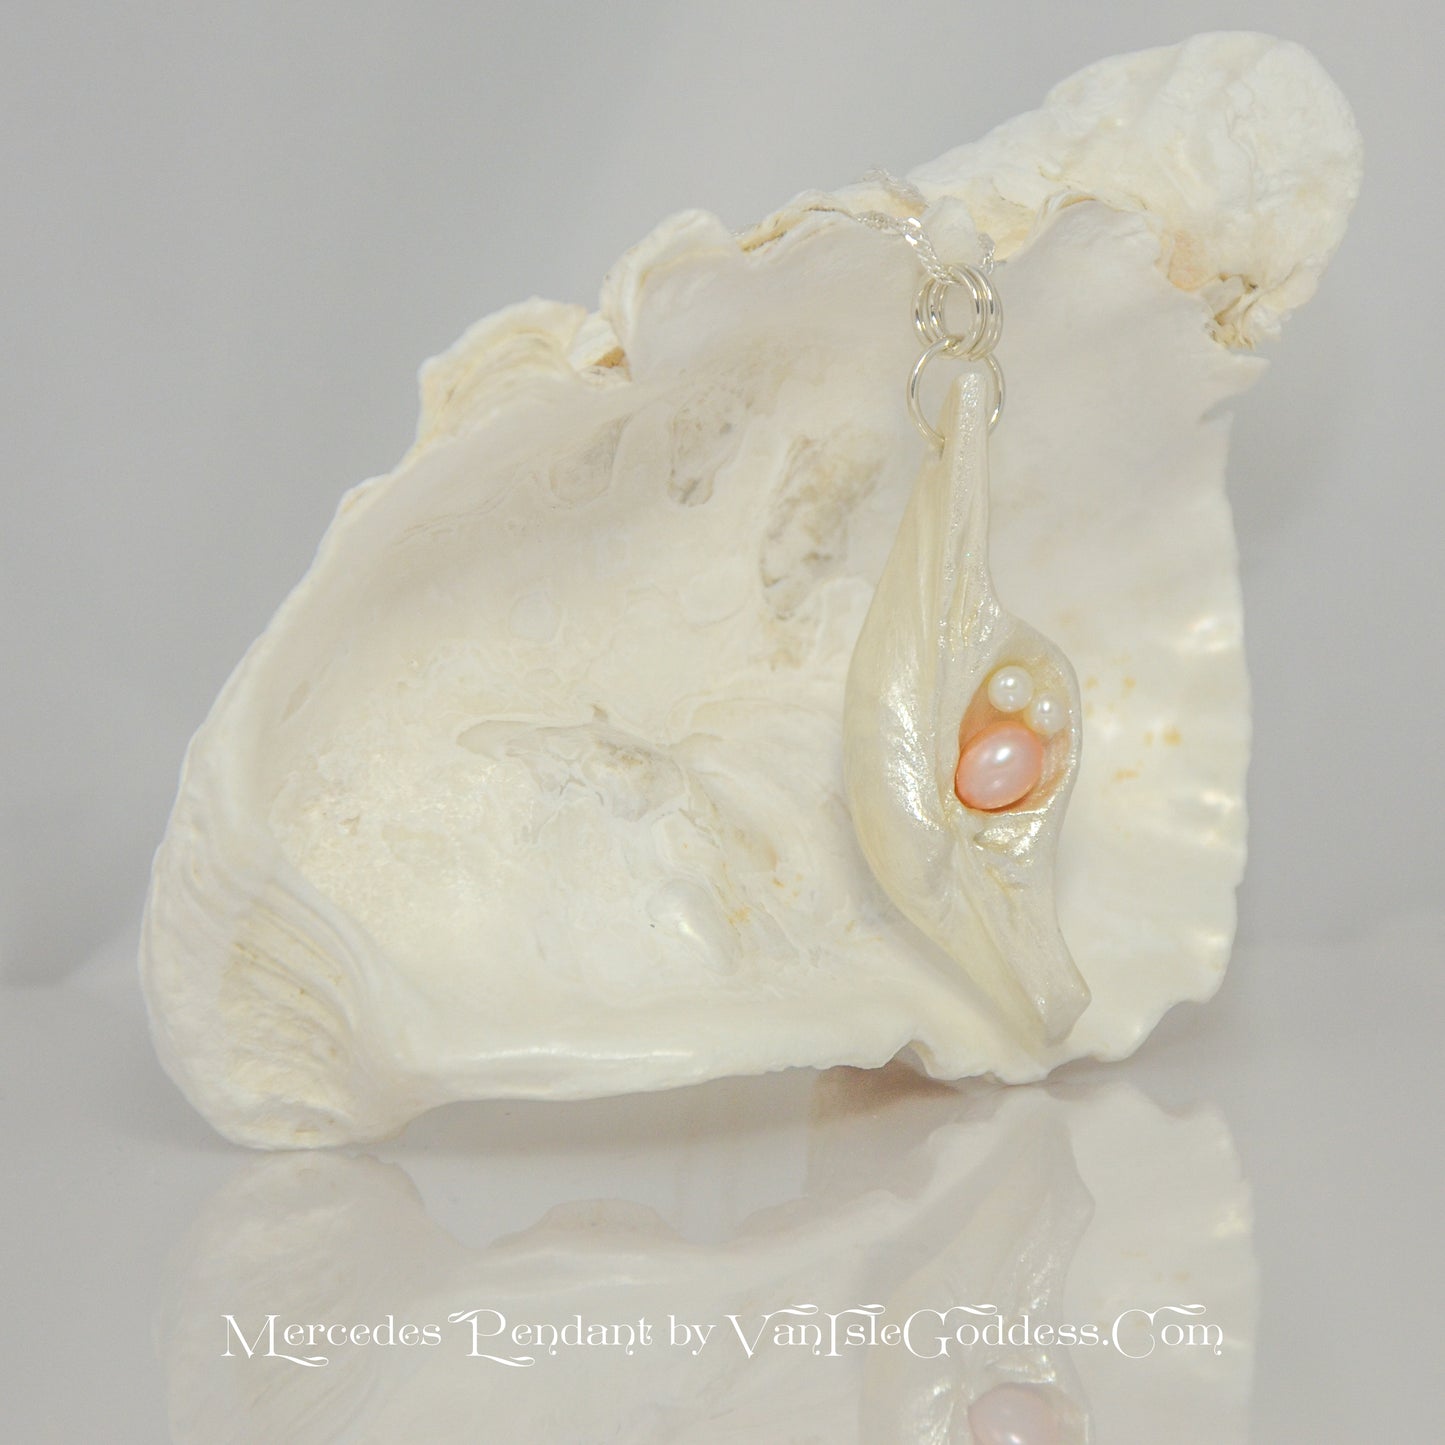 This natural seashell pendant has a real 7-8mm pink freshwater pearl and two baby pearls. The pendant is shown in front of a larger seashell.  The words on the bottom of the image read: Mercedes Pendant by Van Isle Goddess dot com